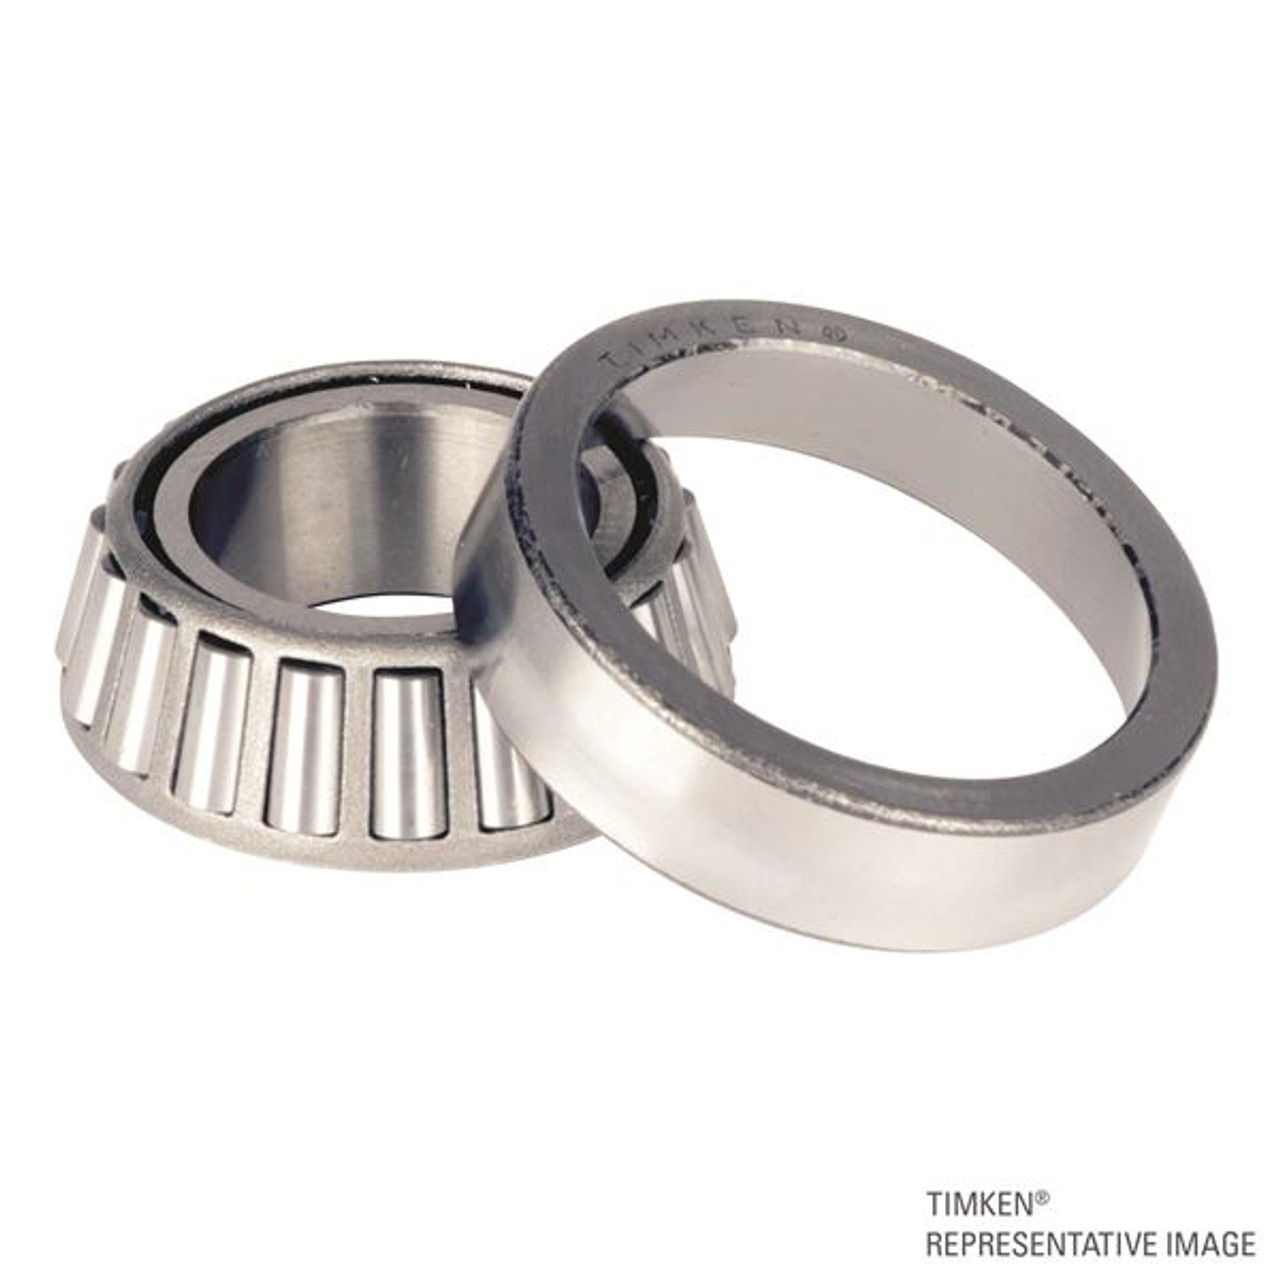 Timken® Single Row Cup & Cone Assembly - Precision Class  XC2214C-905A1